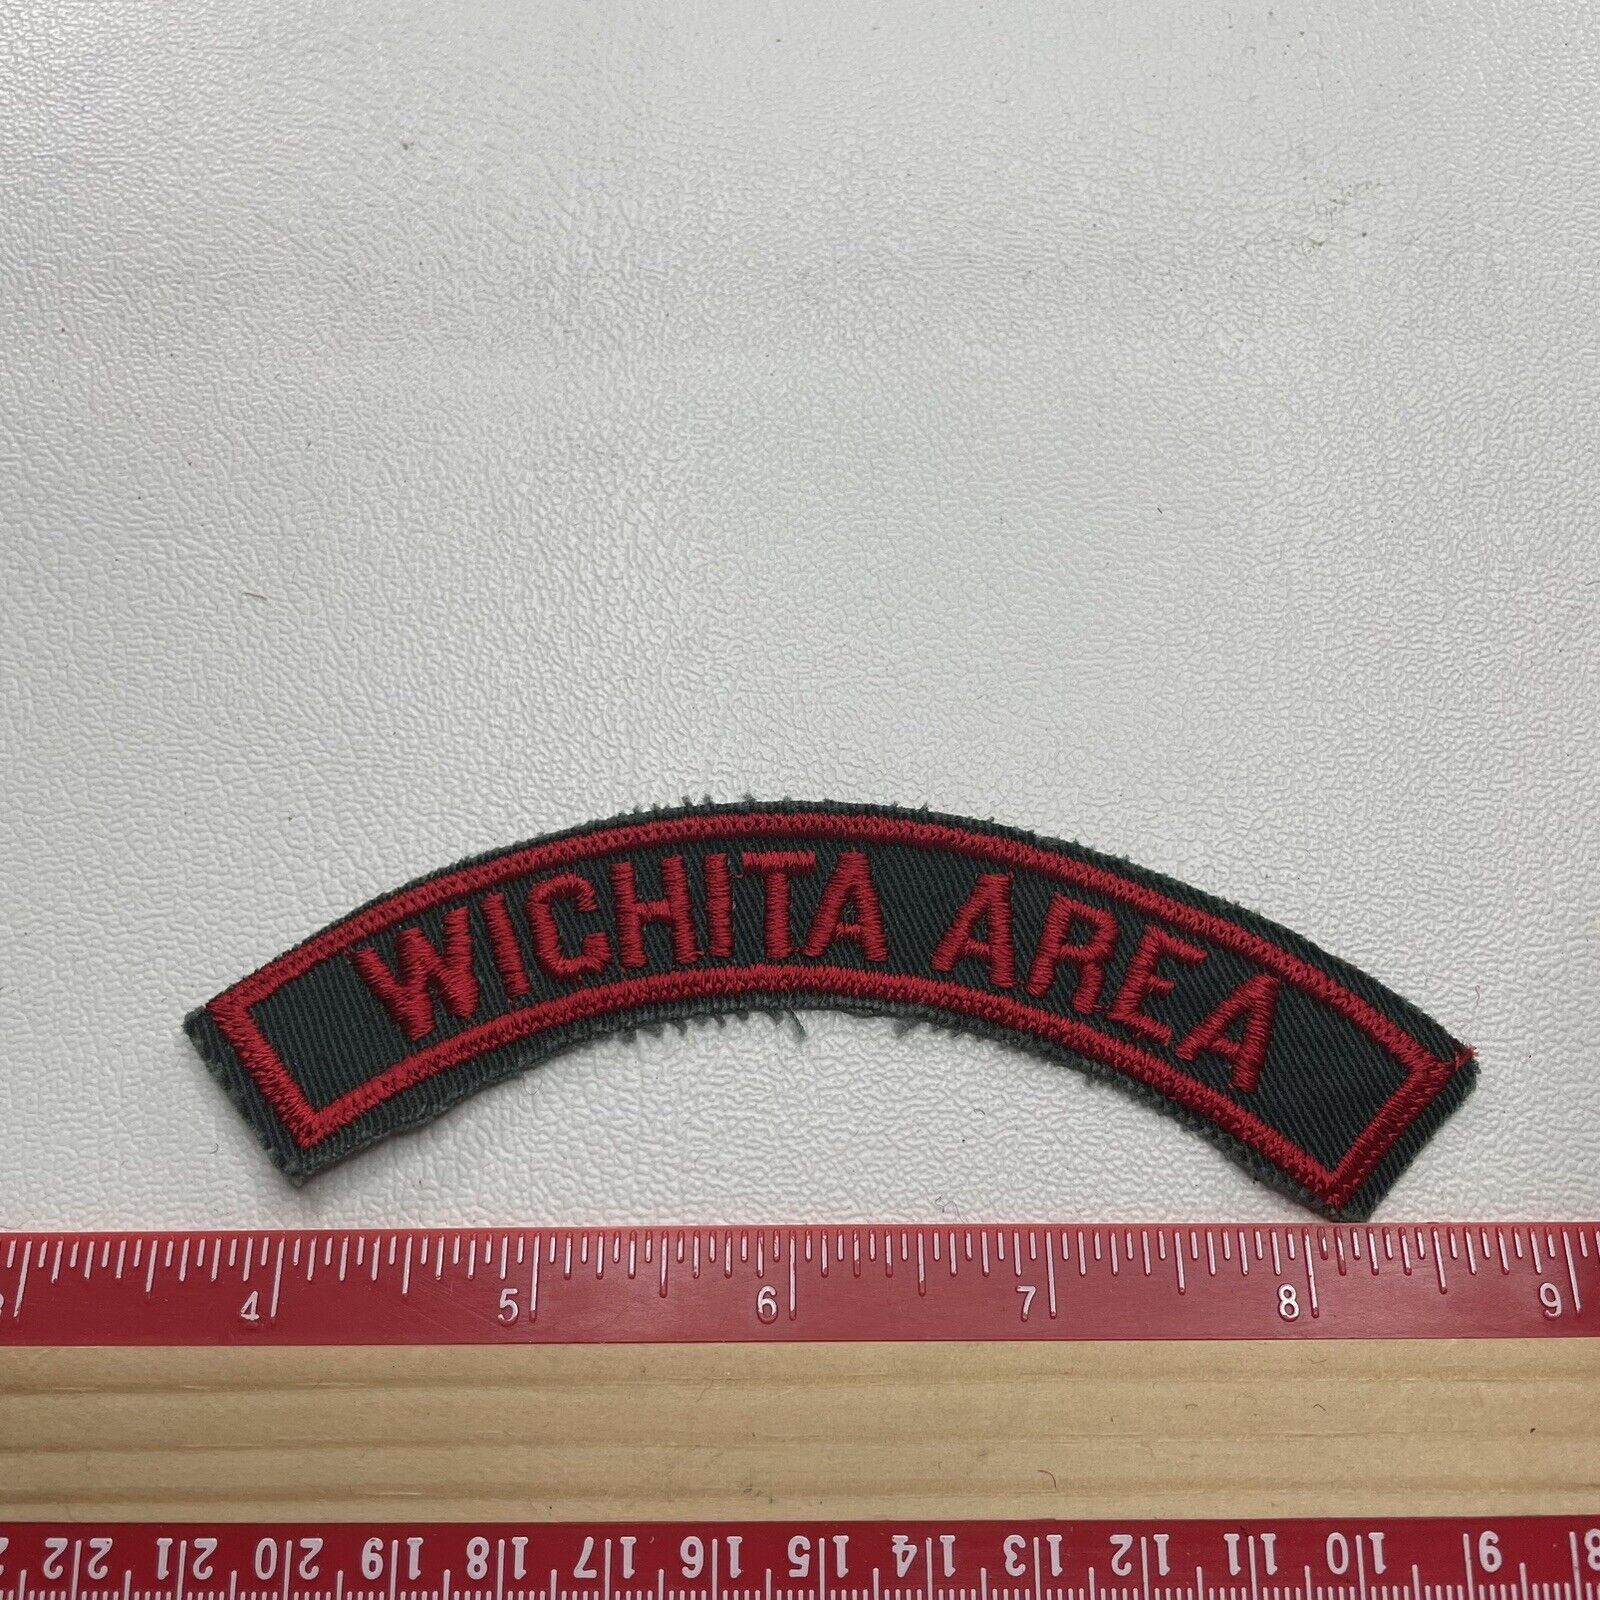 Vintage Thought To Be GIRL SCOUTS WICHITA AREA Kansas Tab Patch P016